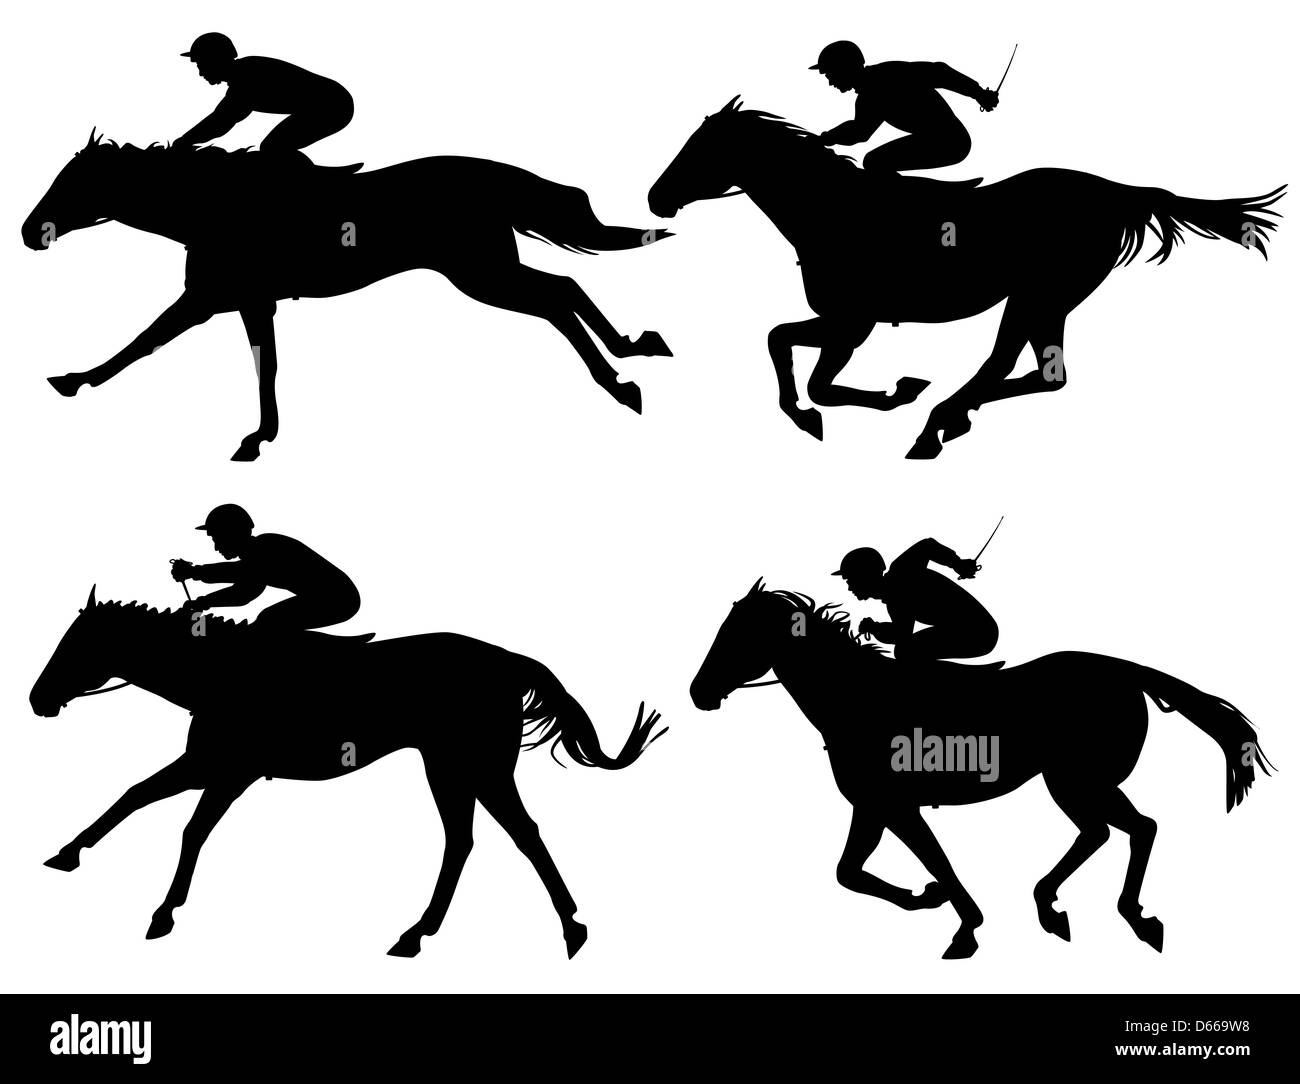 Illustrated silhouettes of racing horses and jockeys Stock Photo